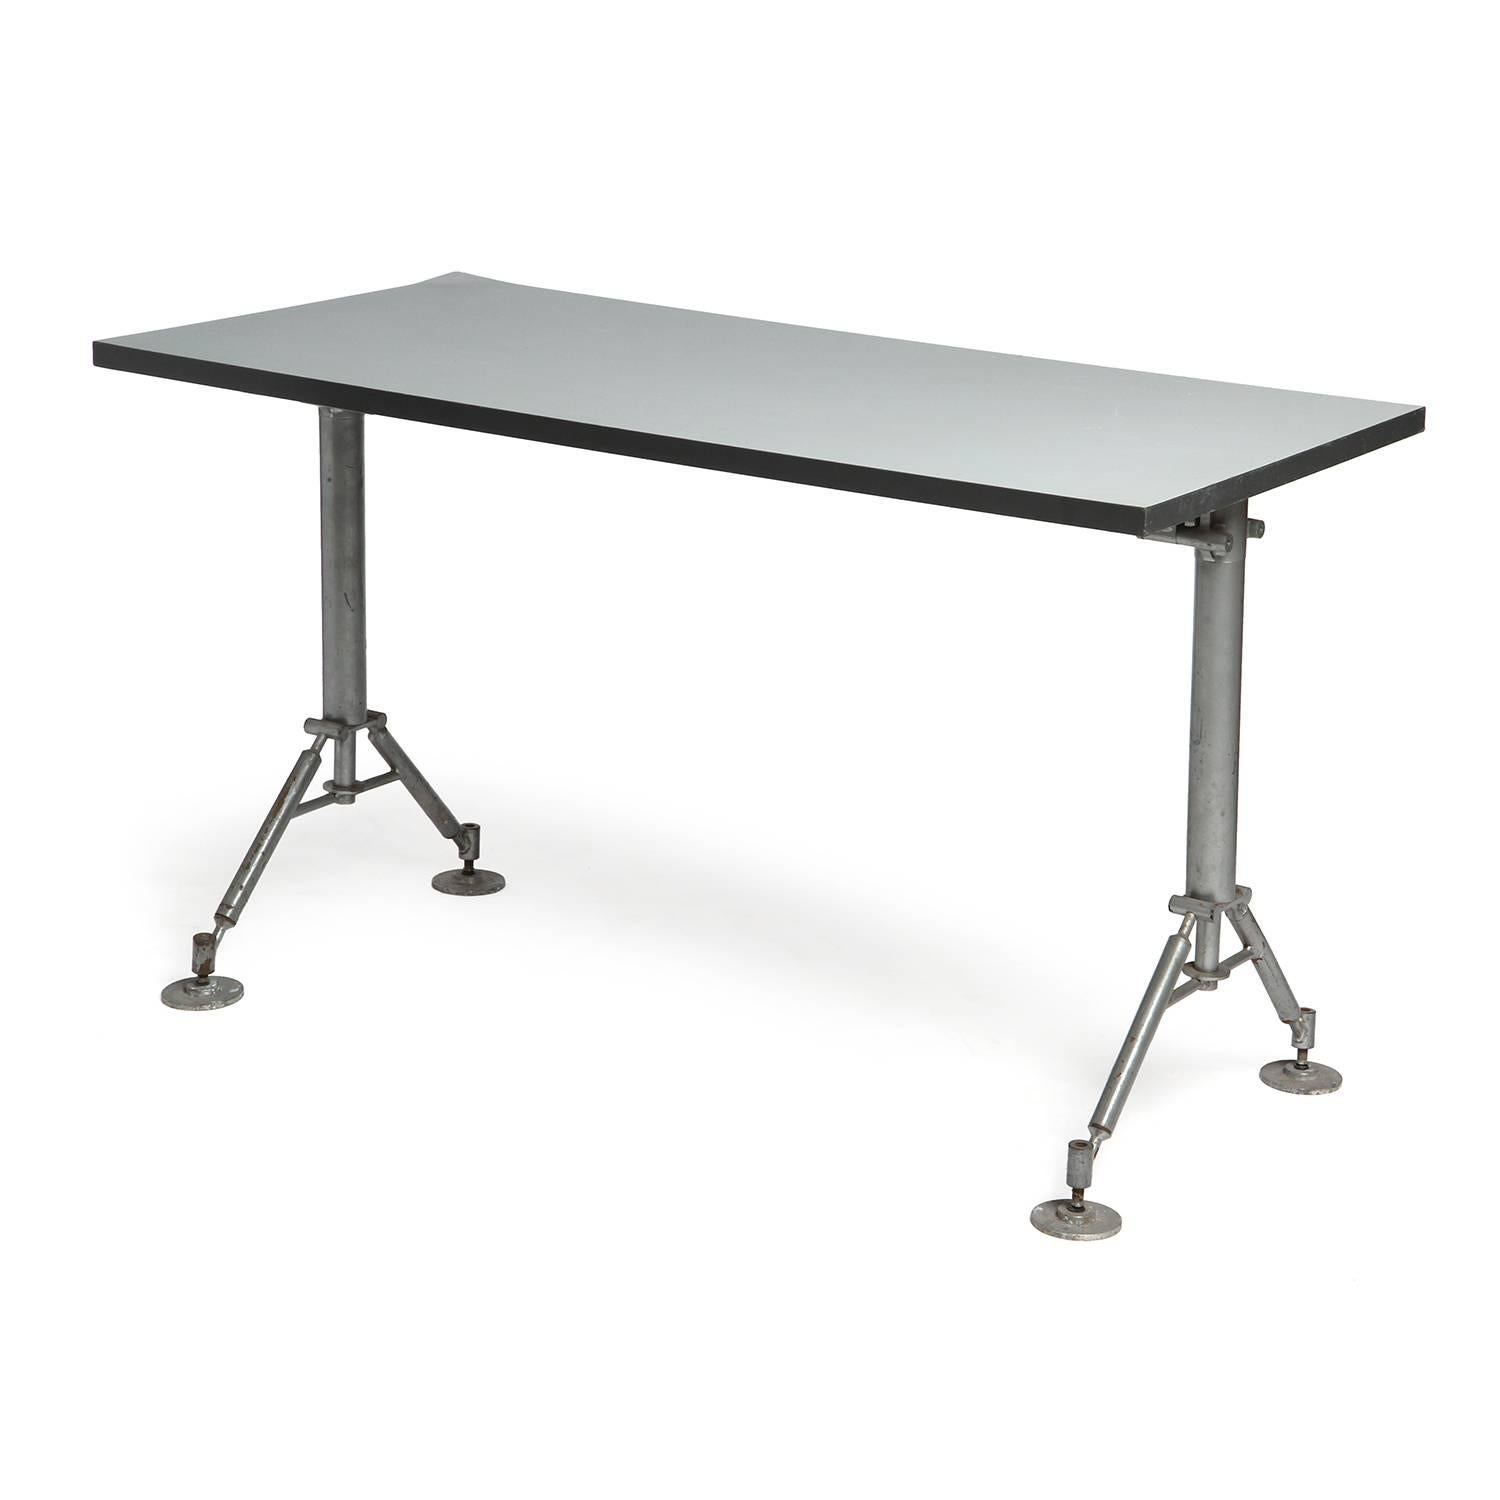 A work table having a steel frame with splayed legs and steel disc feet supporting a floating rectangular top.